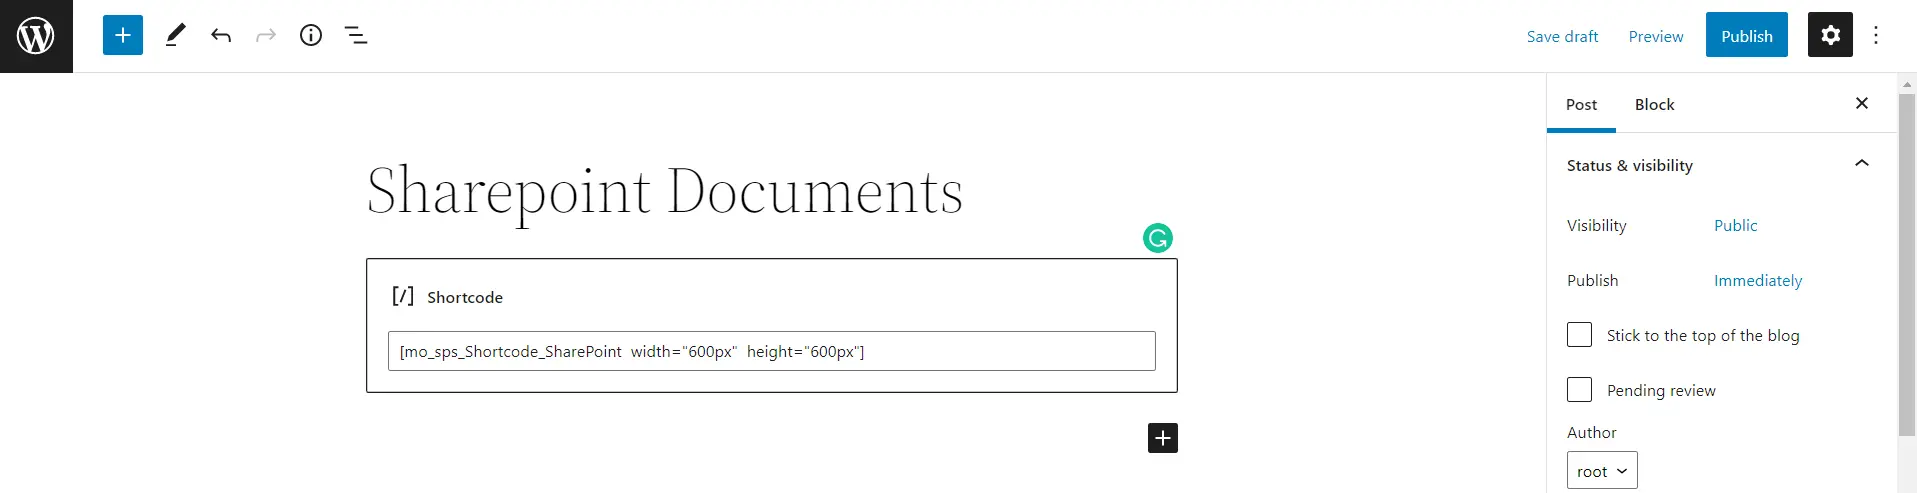 Embed SharePoint documents with WordPress | copy shortcode